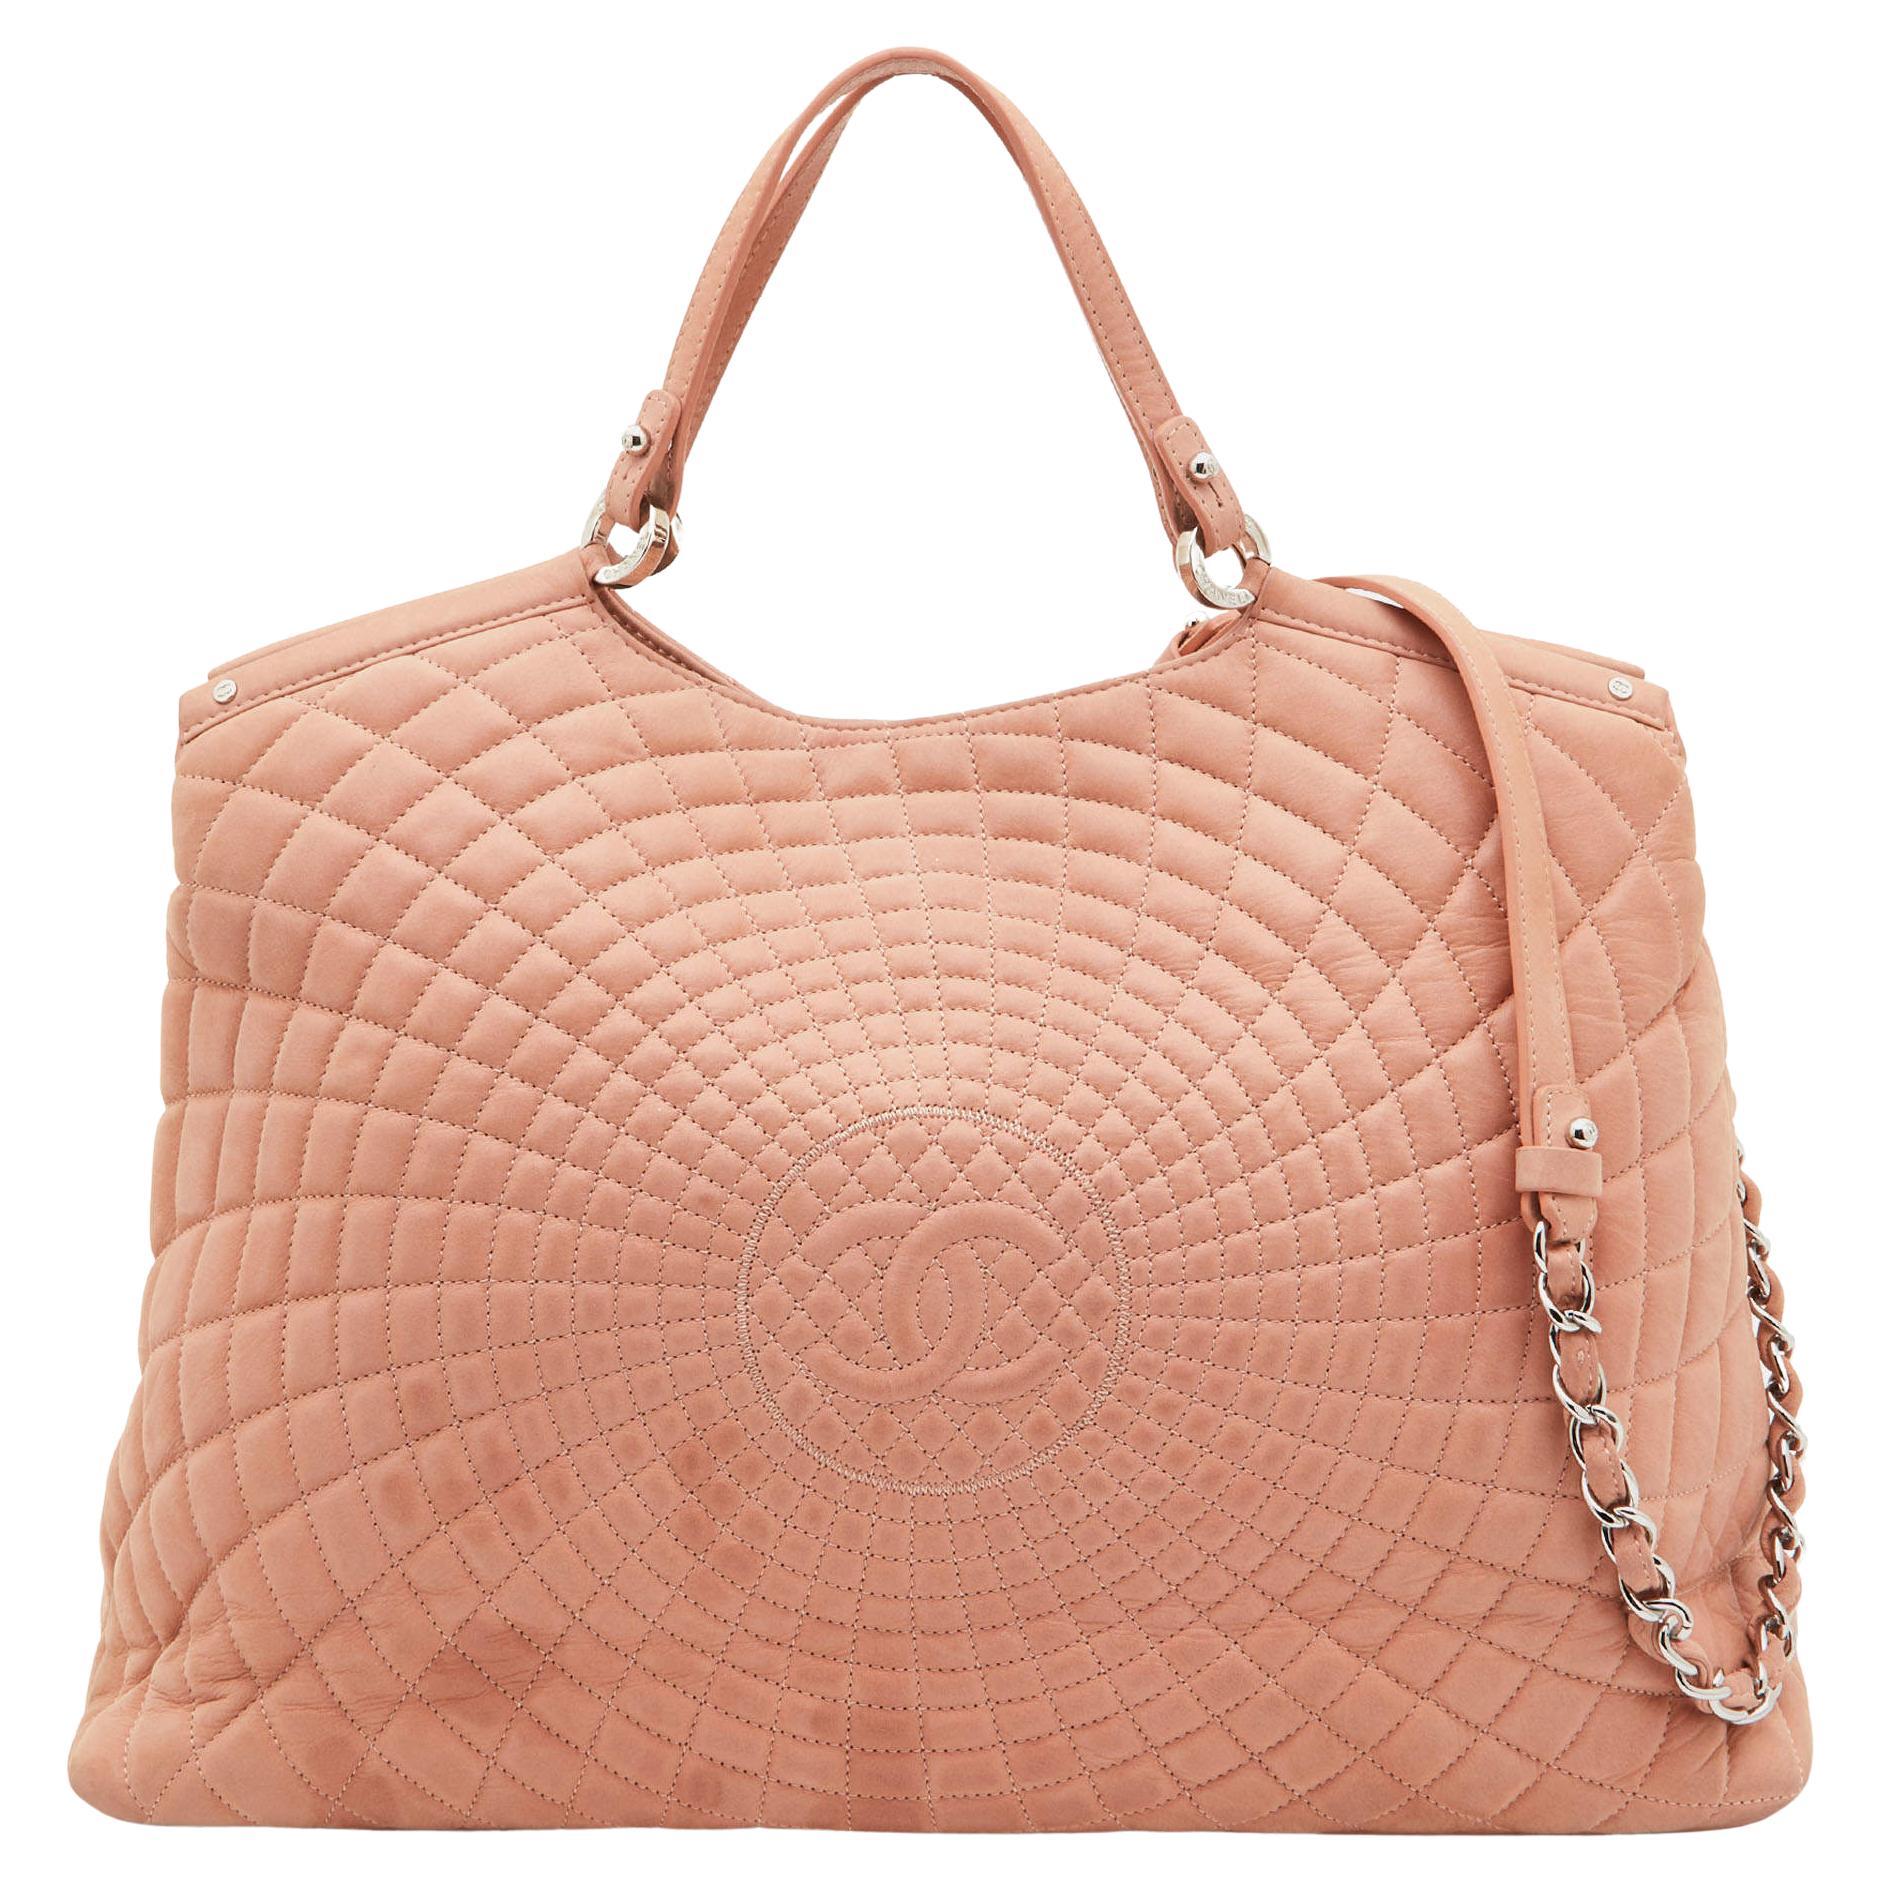 Chanel Light Pink Quilted Iridescent Leather Large Sea Hit Tote For Sale